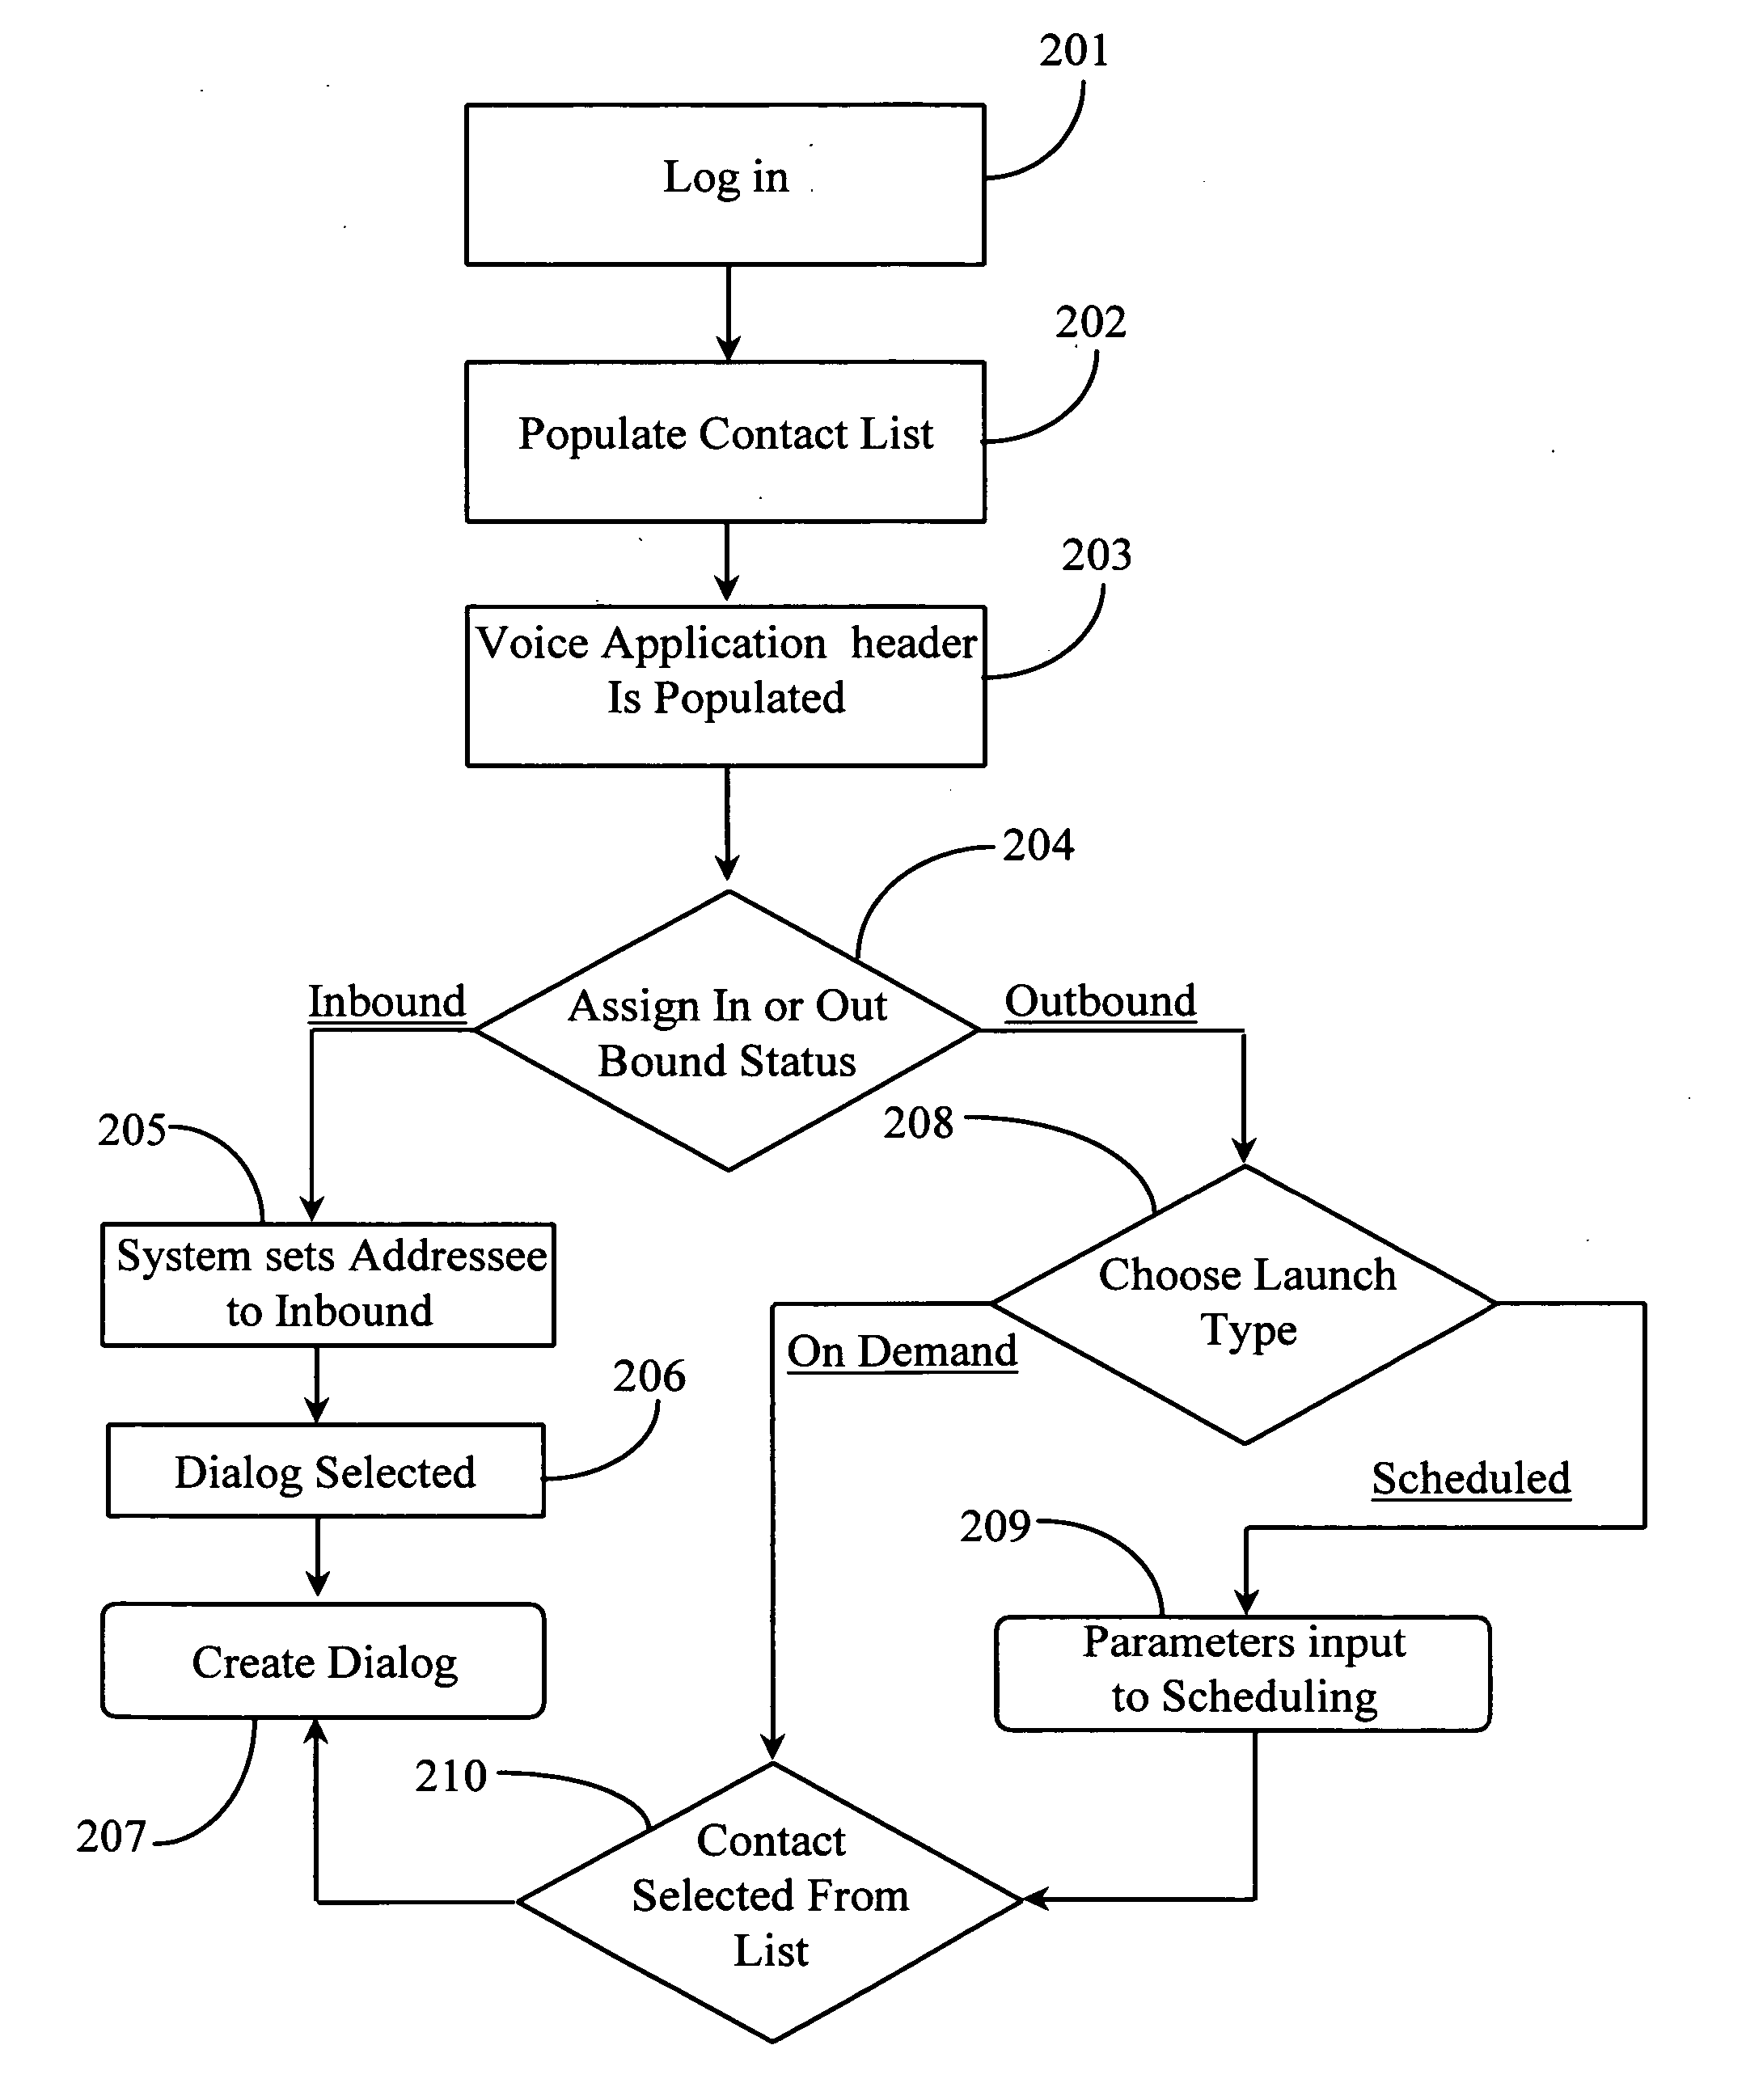 Method and apparatus for adapting a voice extensible markup language-enabled voice system for natural speech recognition and system response